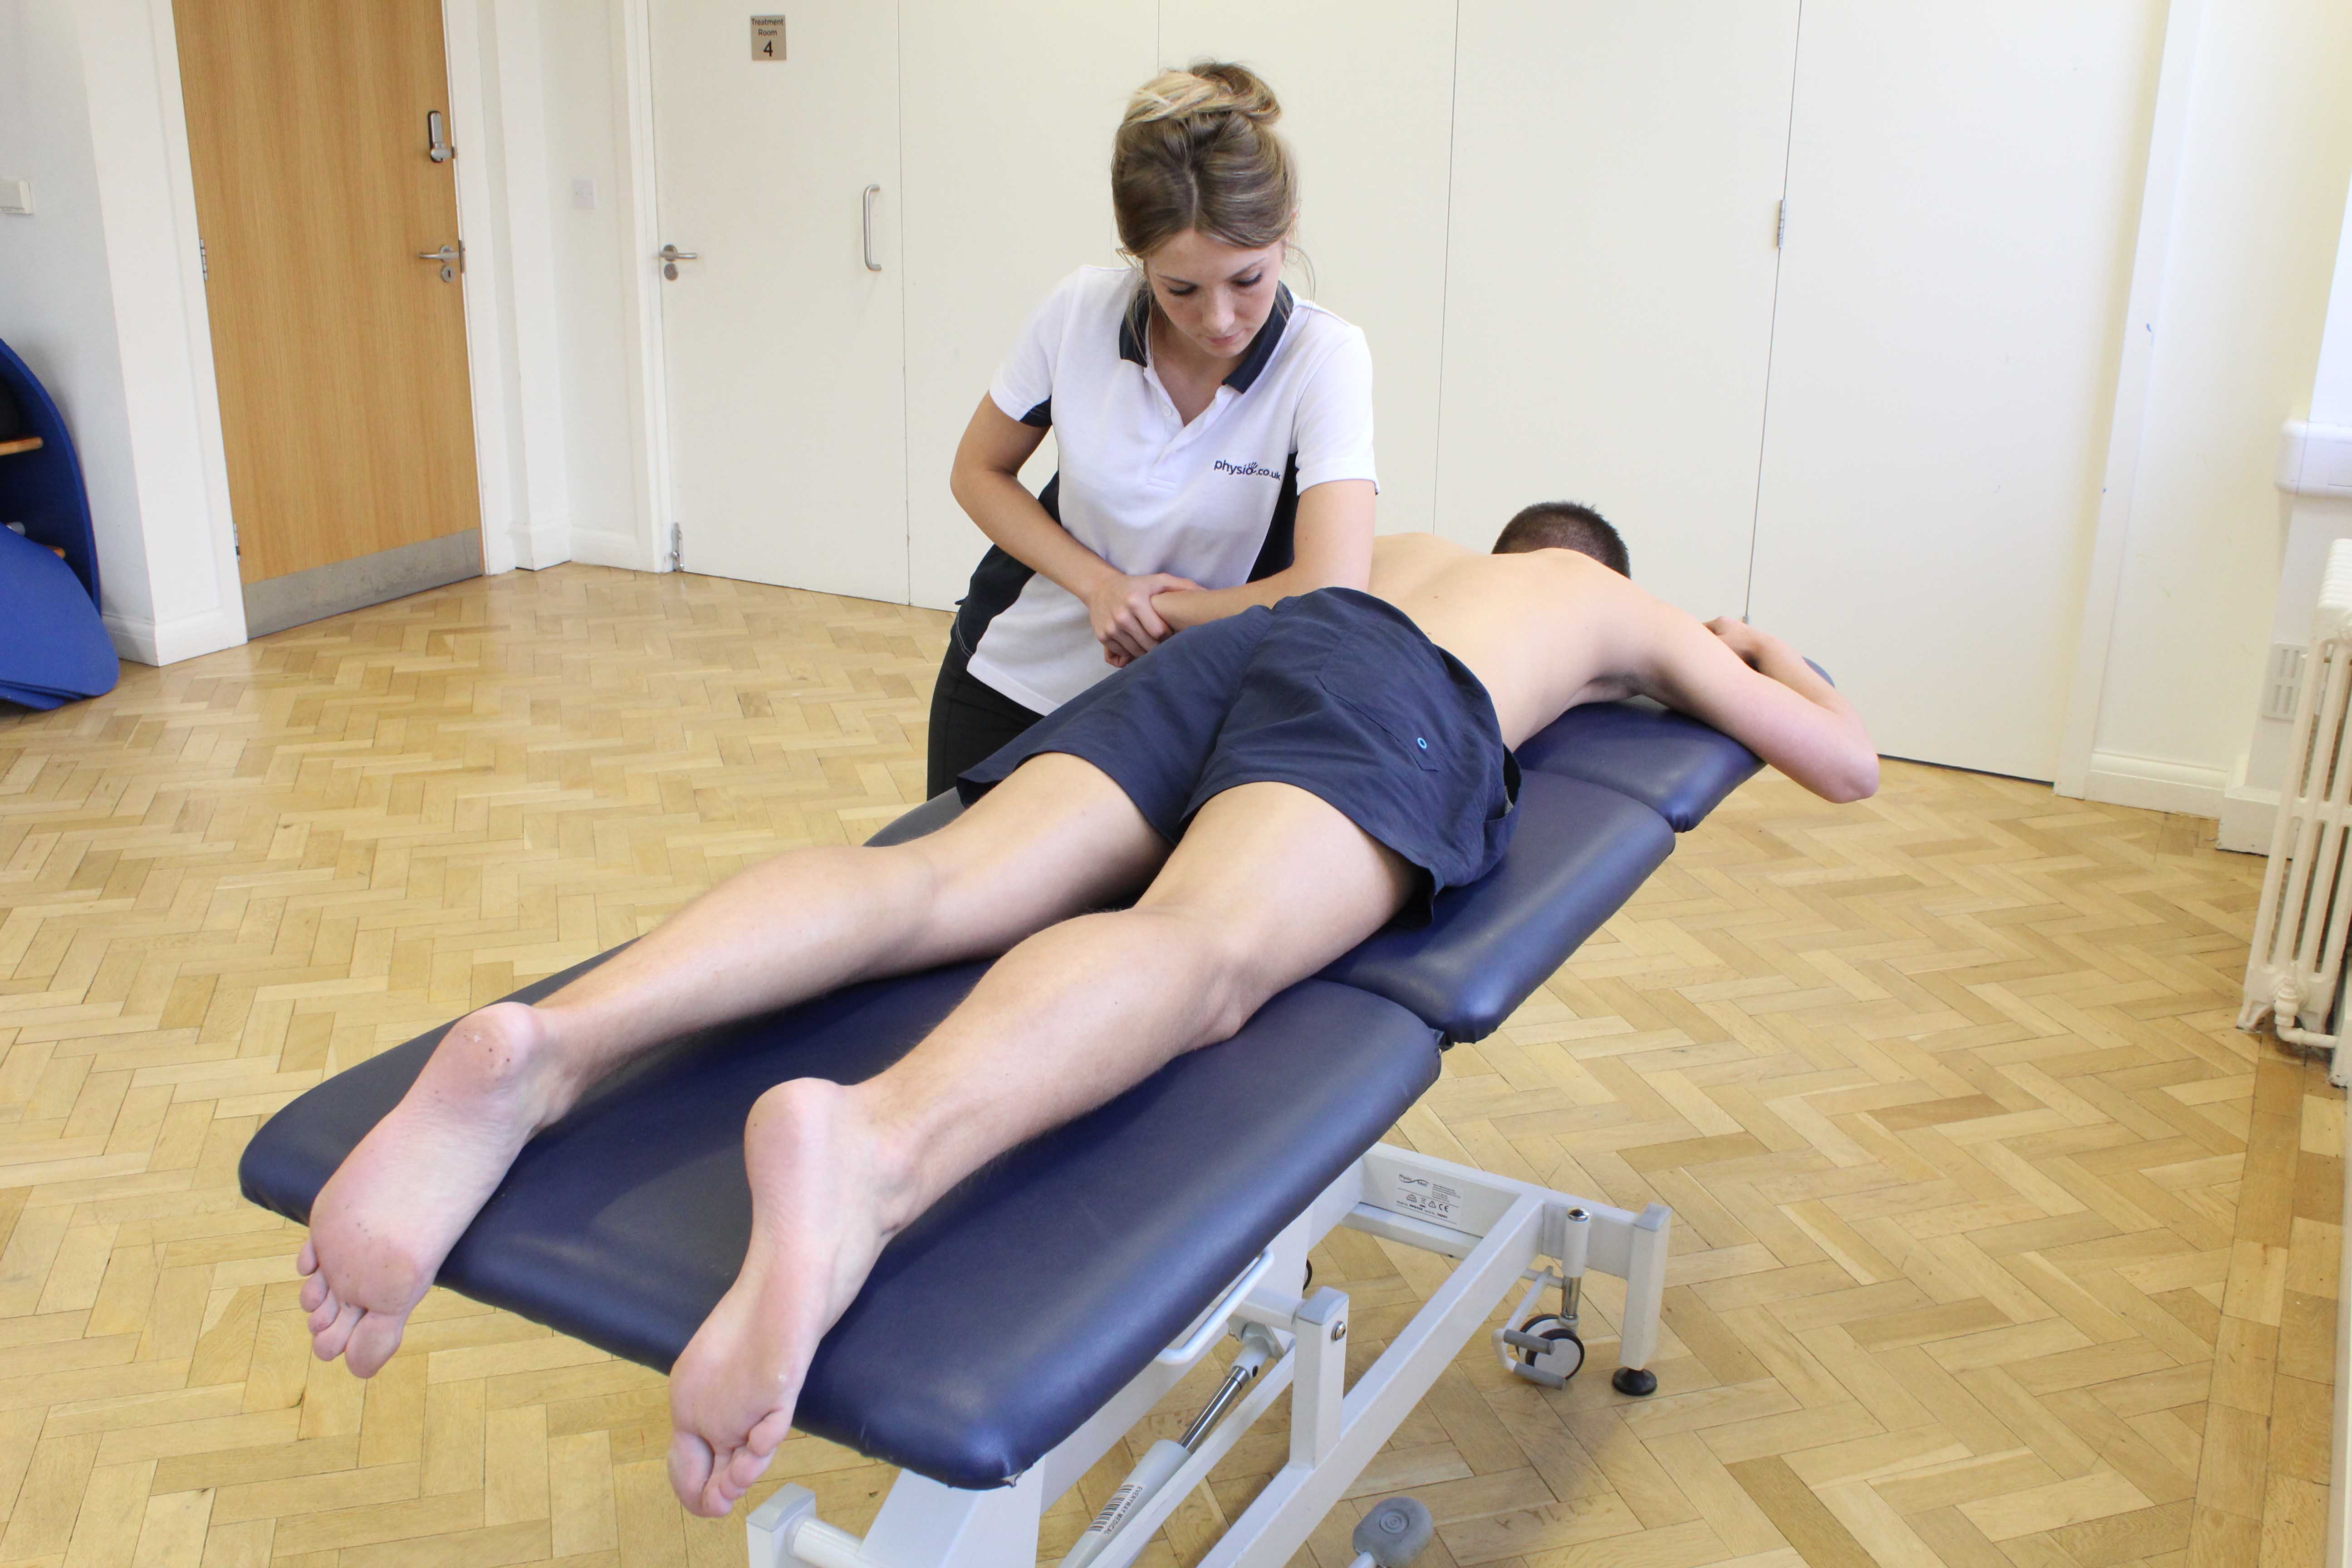 Deep tissue massage can help lower muscle tone and relieve joint stiffness